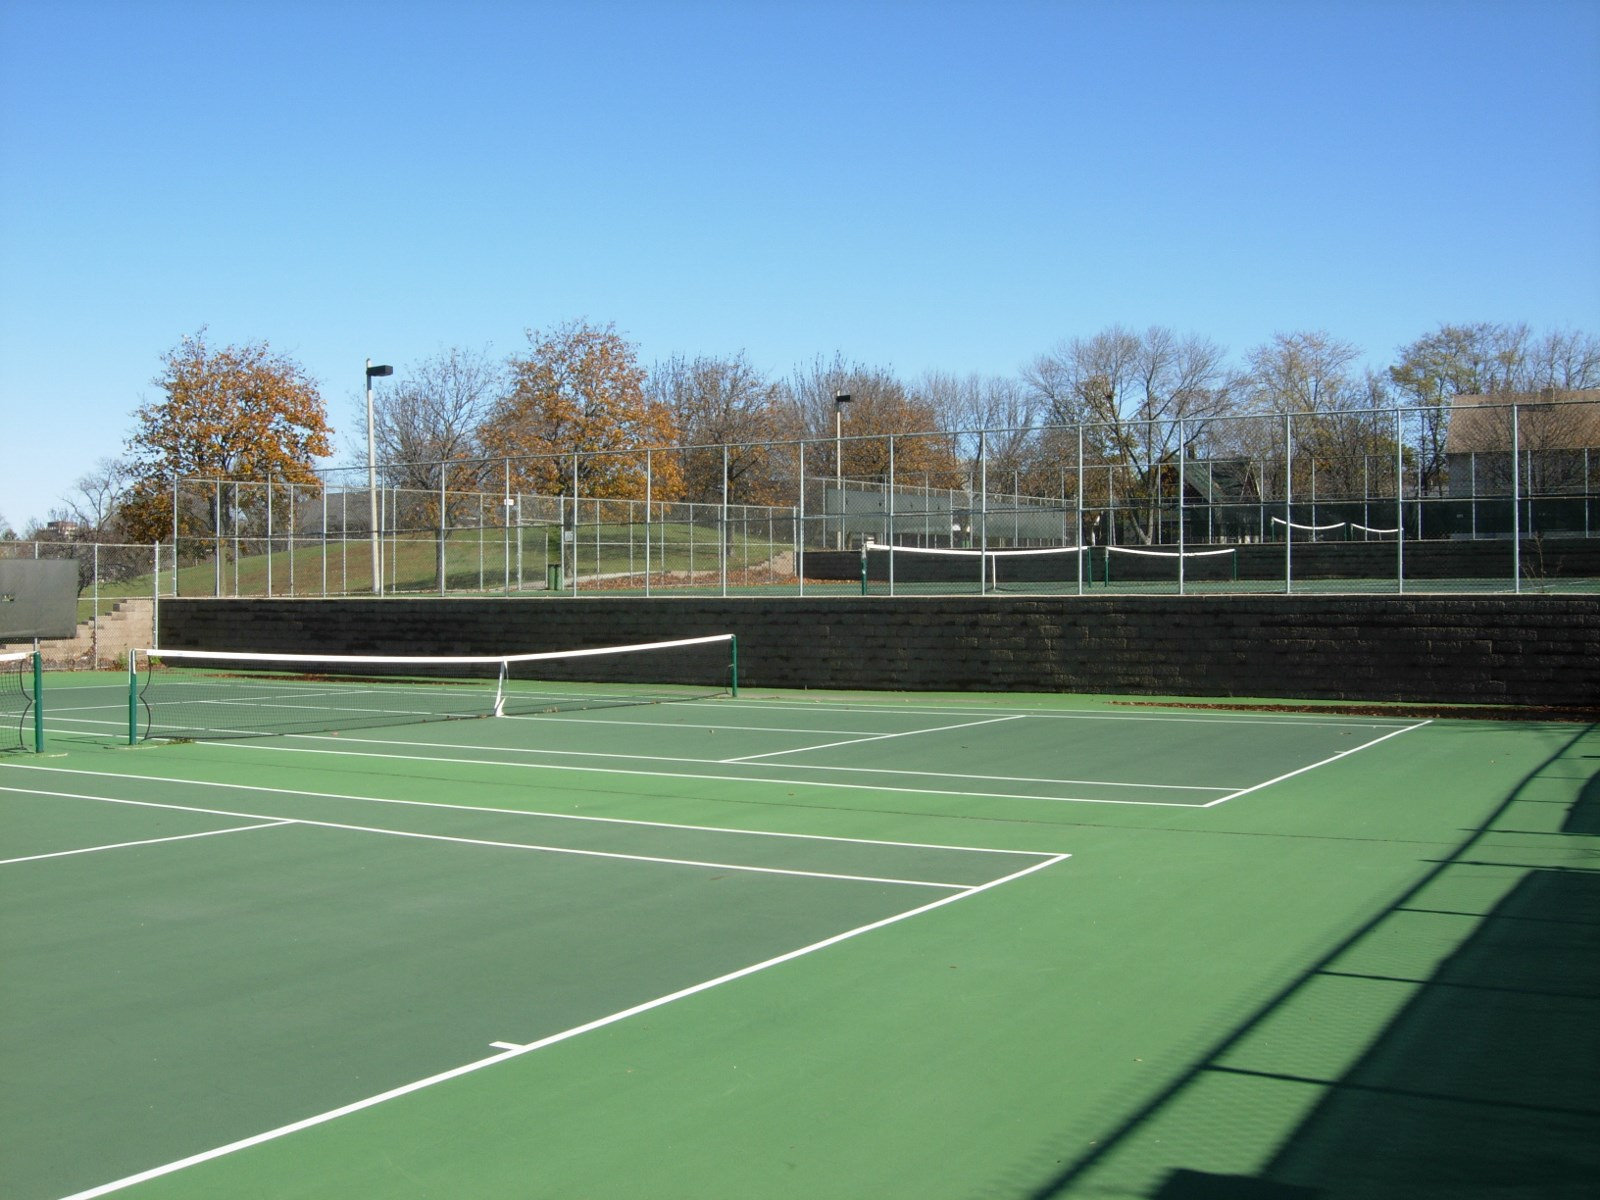 Best tennis courts in NYC: Where to play tennis outdoors